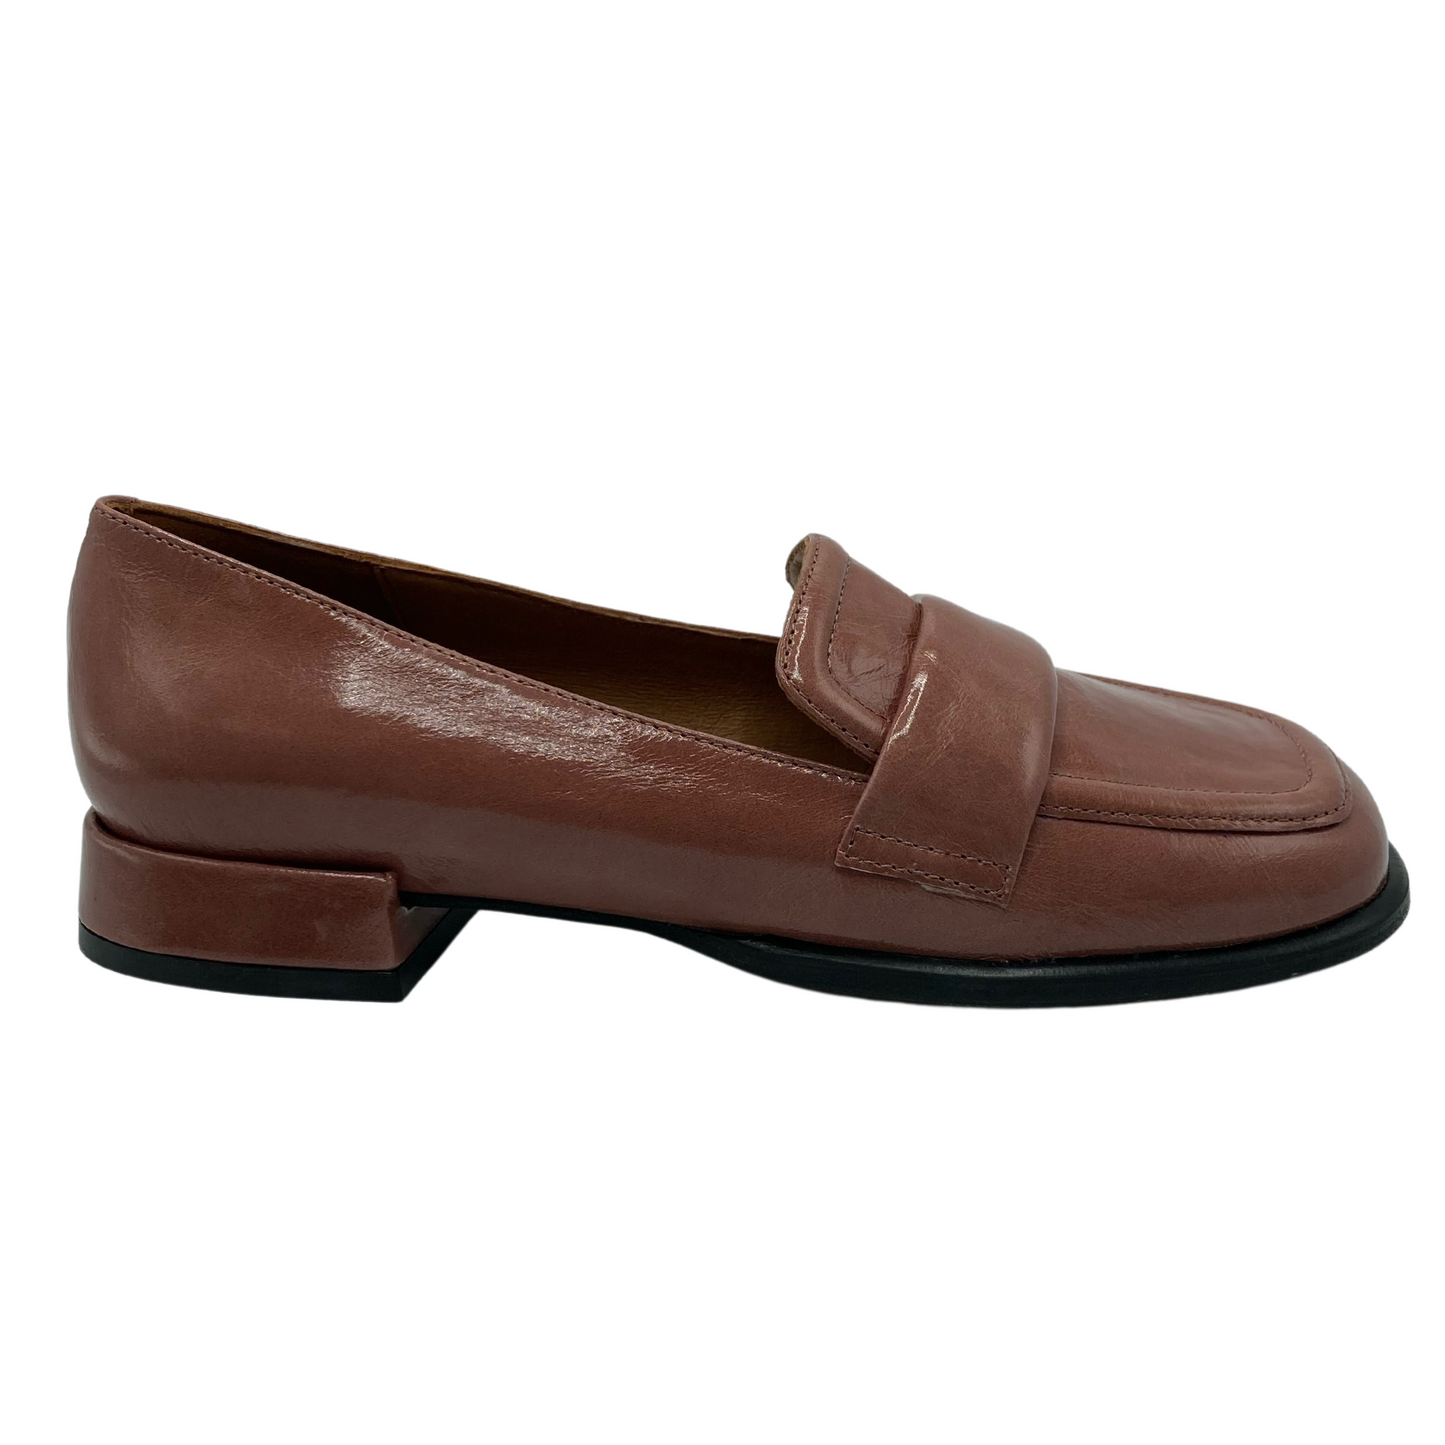 Right facing view of brown patent leather loafer with low heel and black outsole